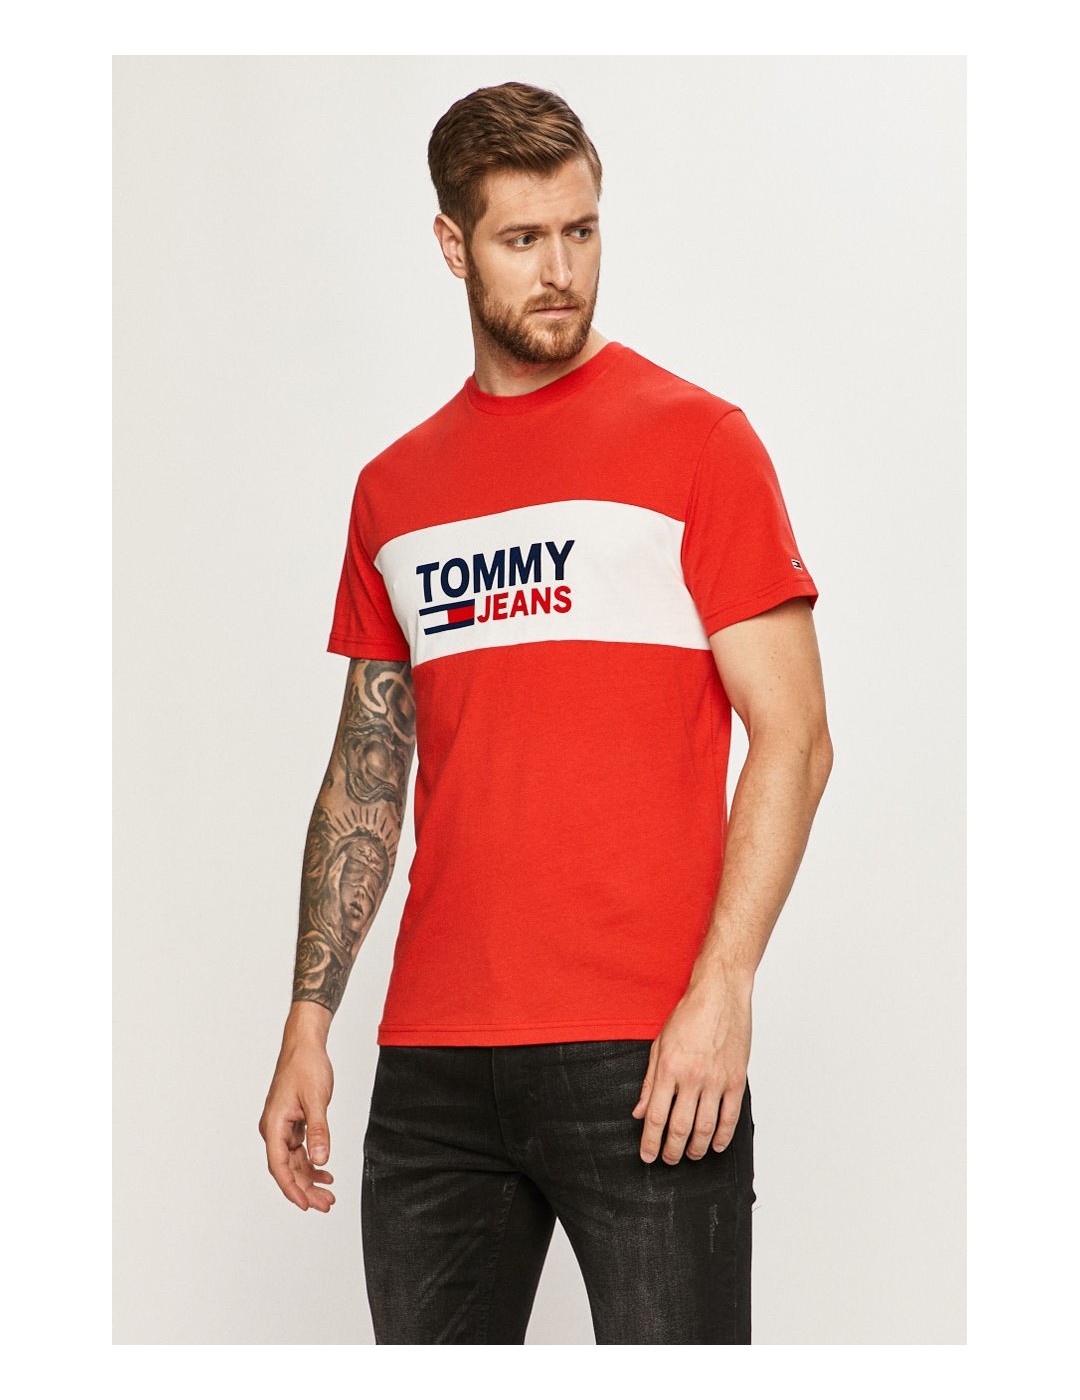 CAMISETA TOMMY JEANS PIECED BAND LOGO TEE RED